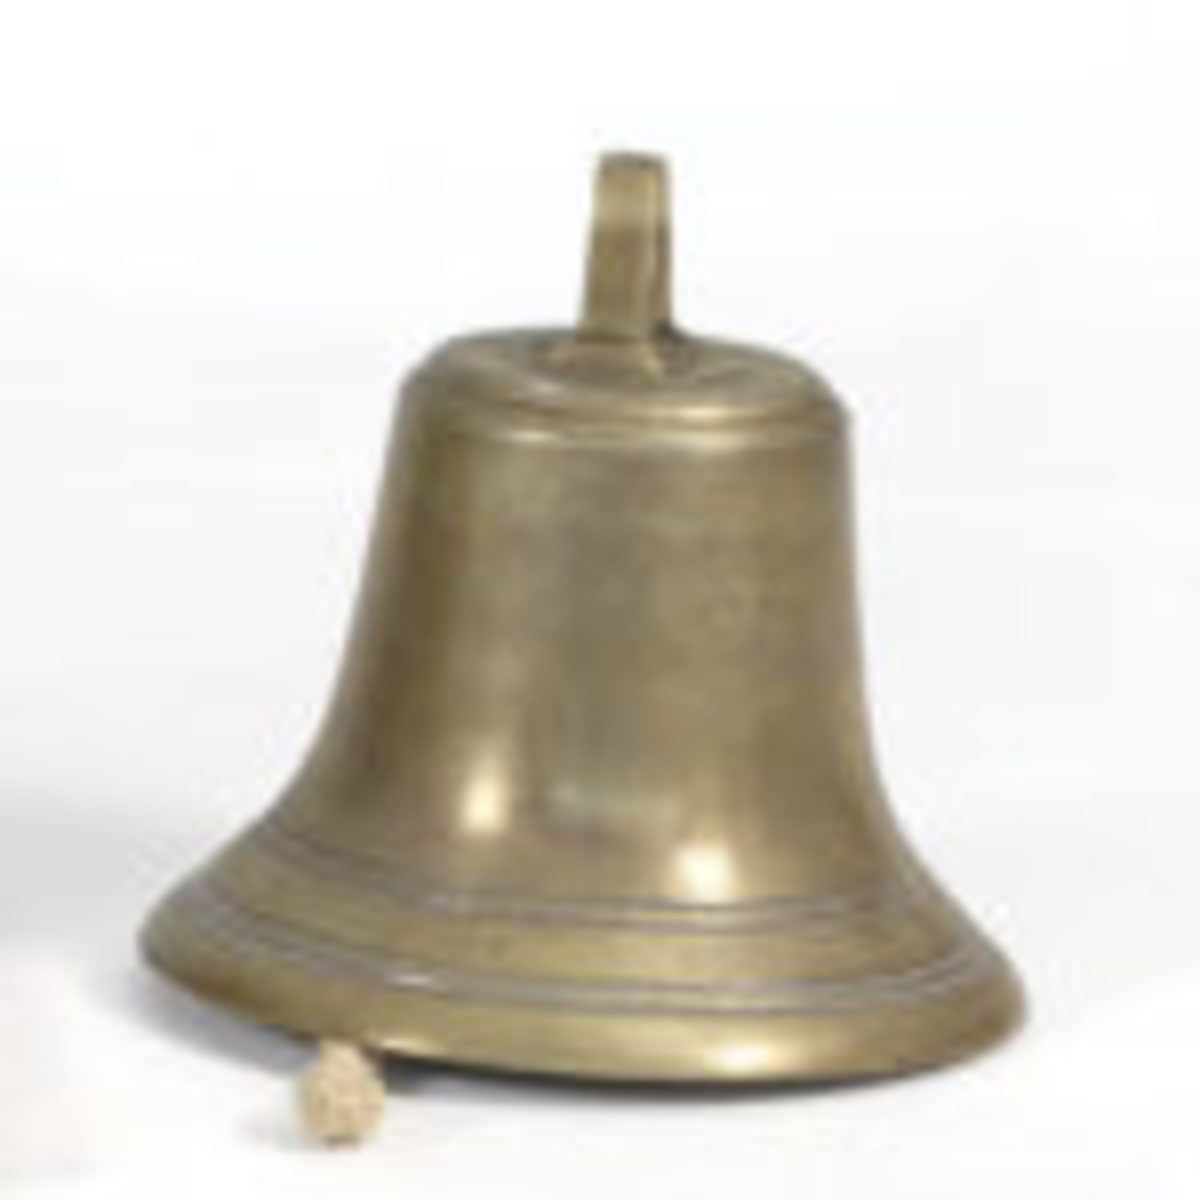 Yacht’s bell, circa late 19th/early 20th century, clapper with sailor-made rope-work pull. 9-1/2” h., 10” d., $200 Eldred’s Auctioneers & Appraisers, www.eldreds.com